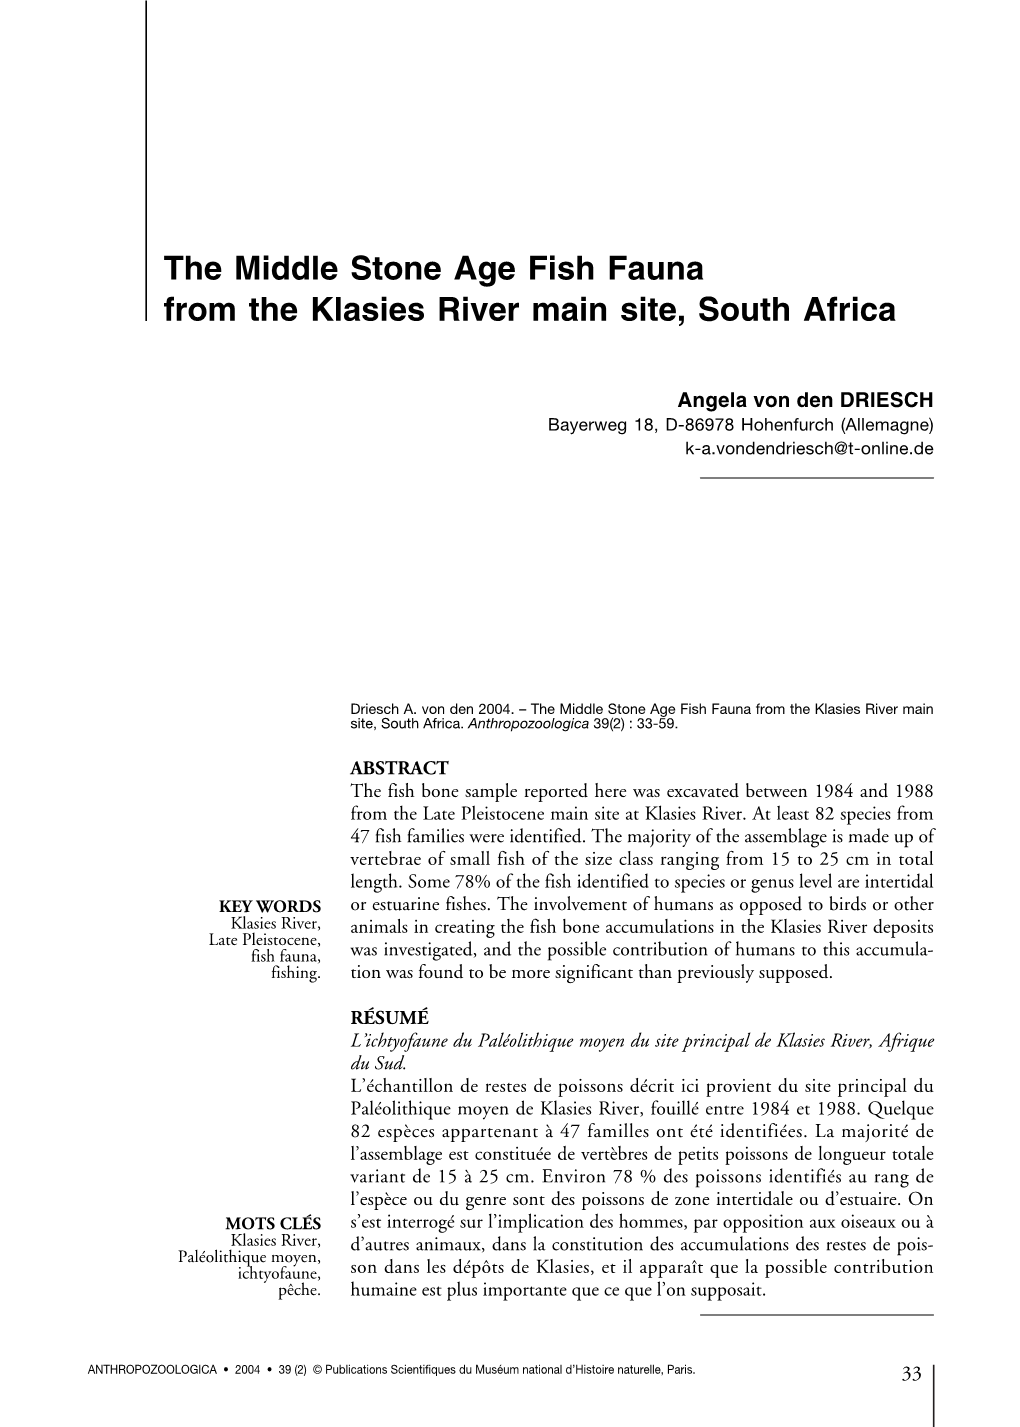 The Middle Stone Age Fish Fauna from the Klasies River Main Site, South Africa